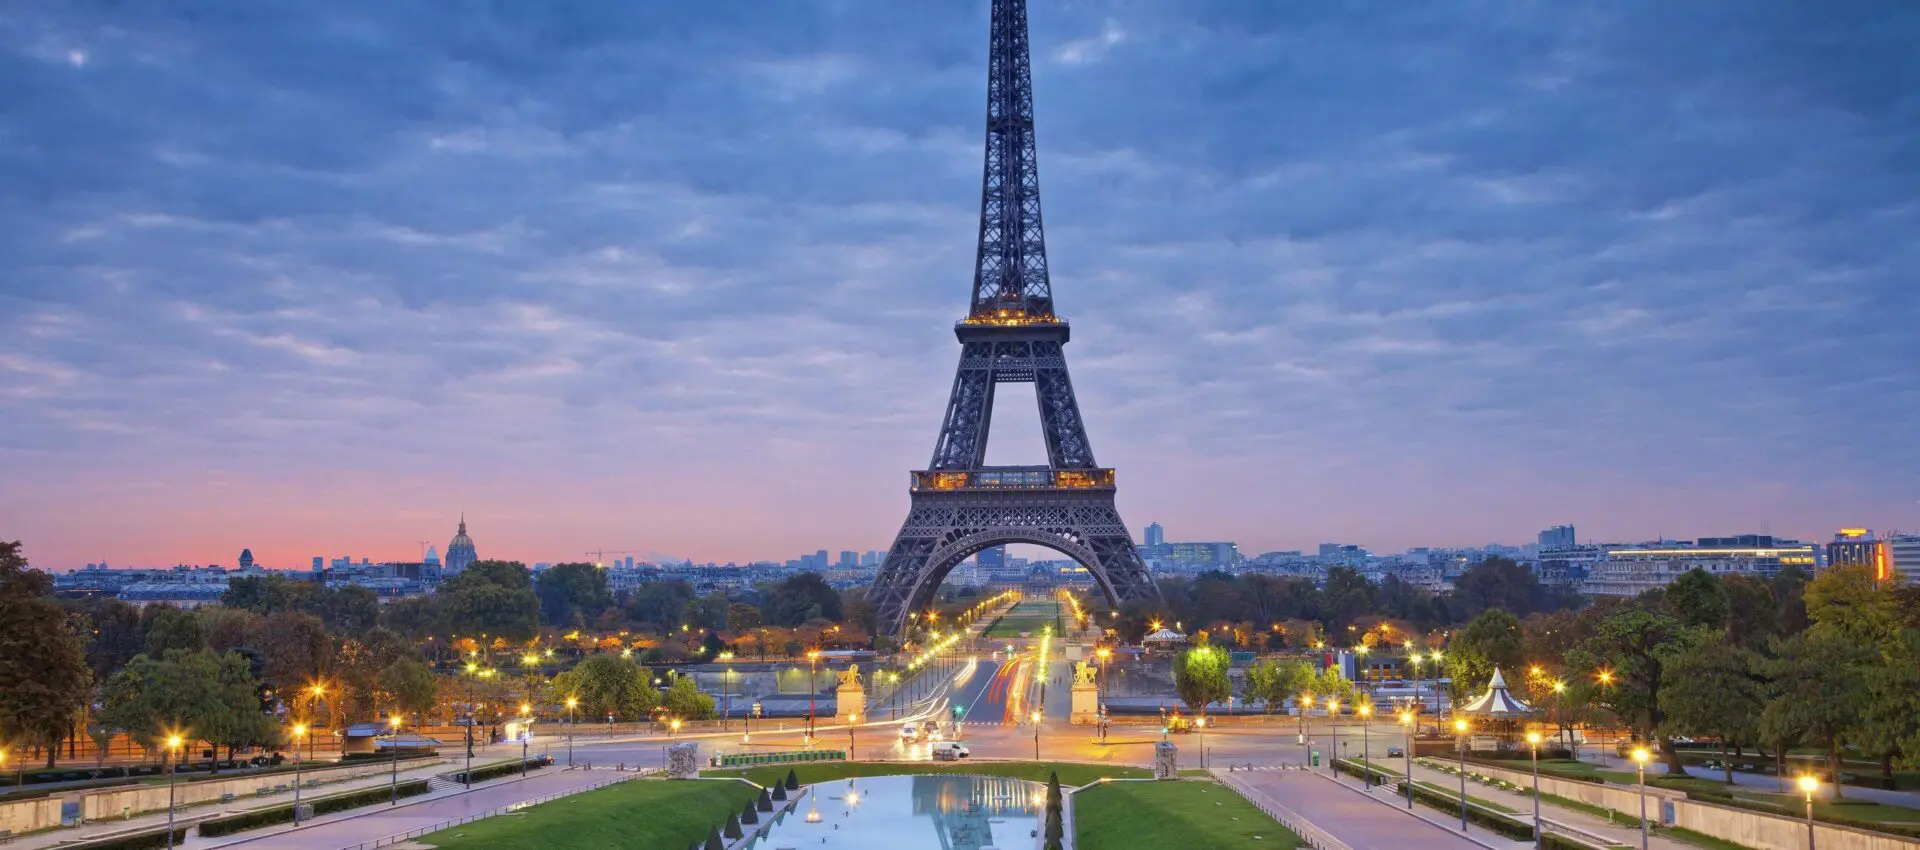 Image of the Eiffel Tower at sunset